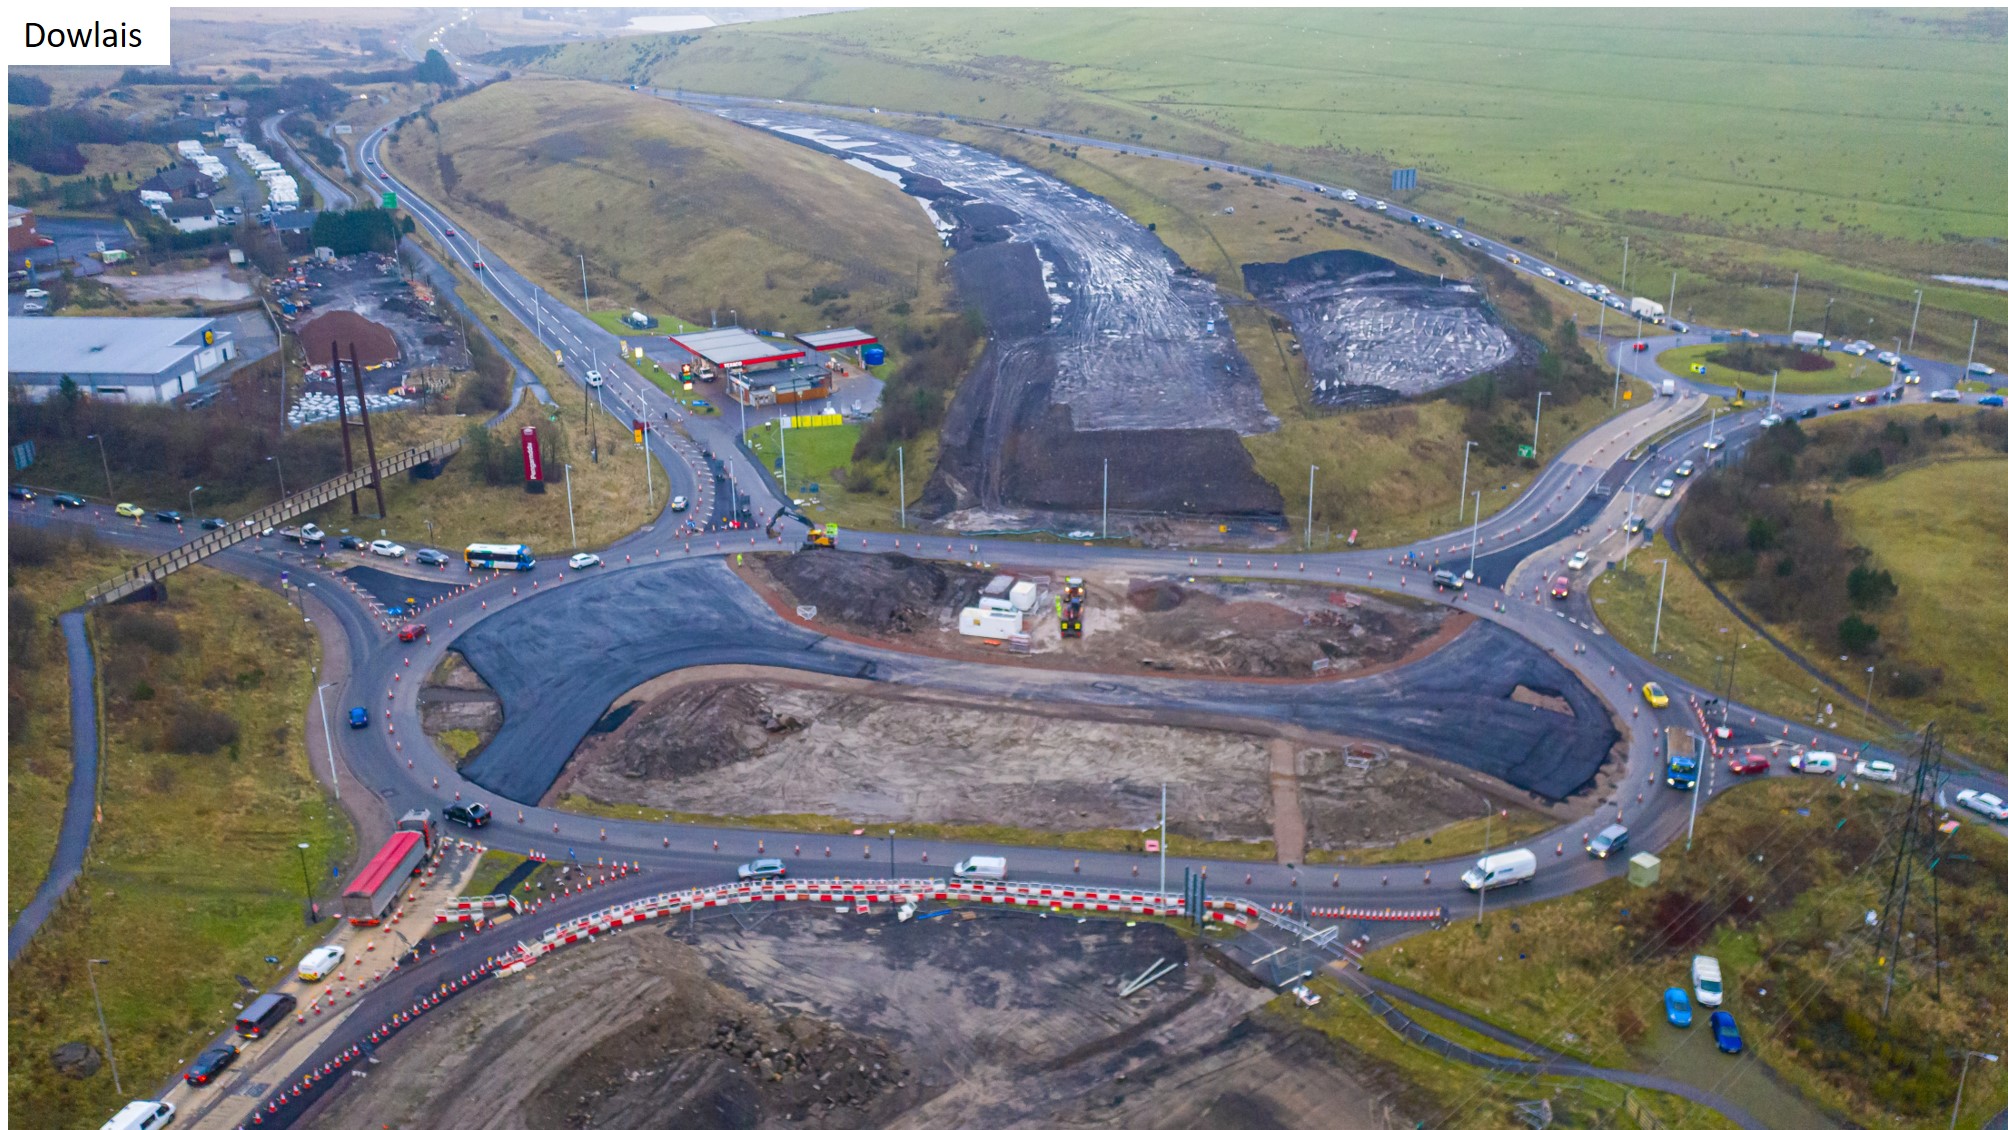 Works at Dowlais Top junction